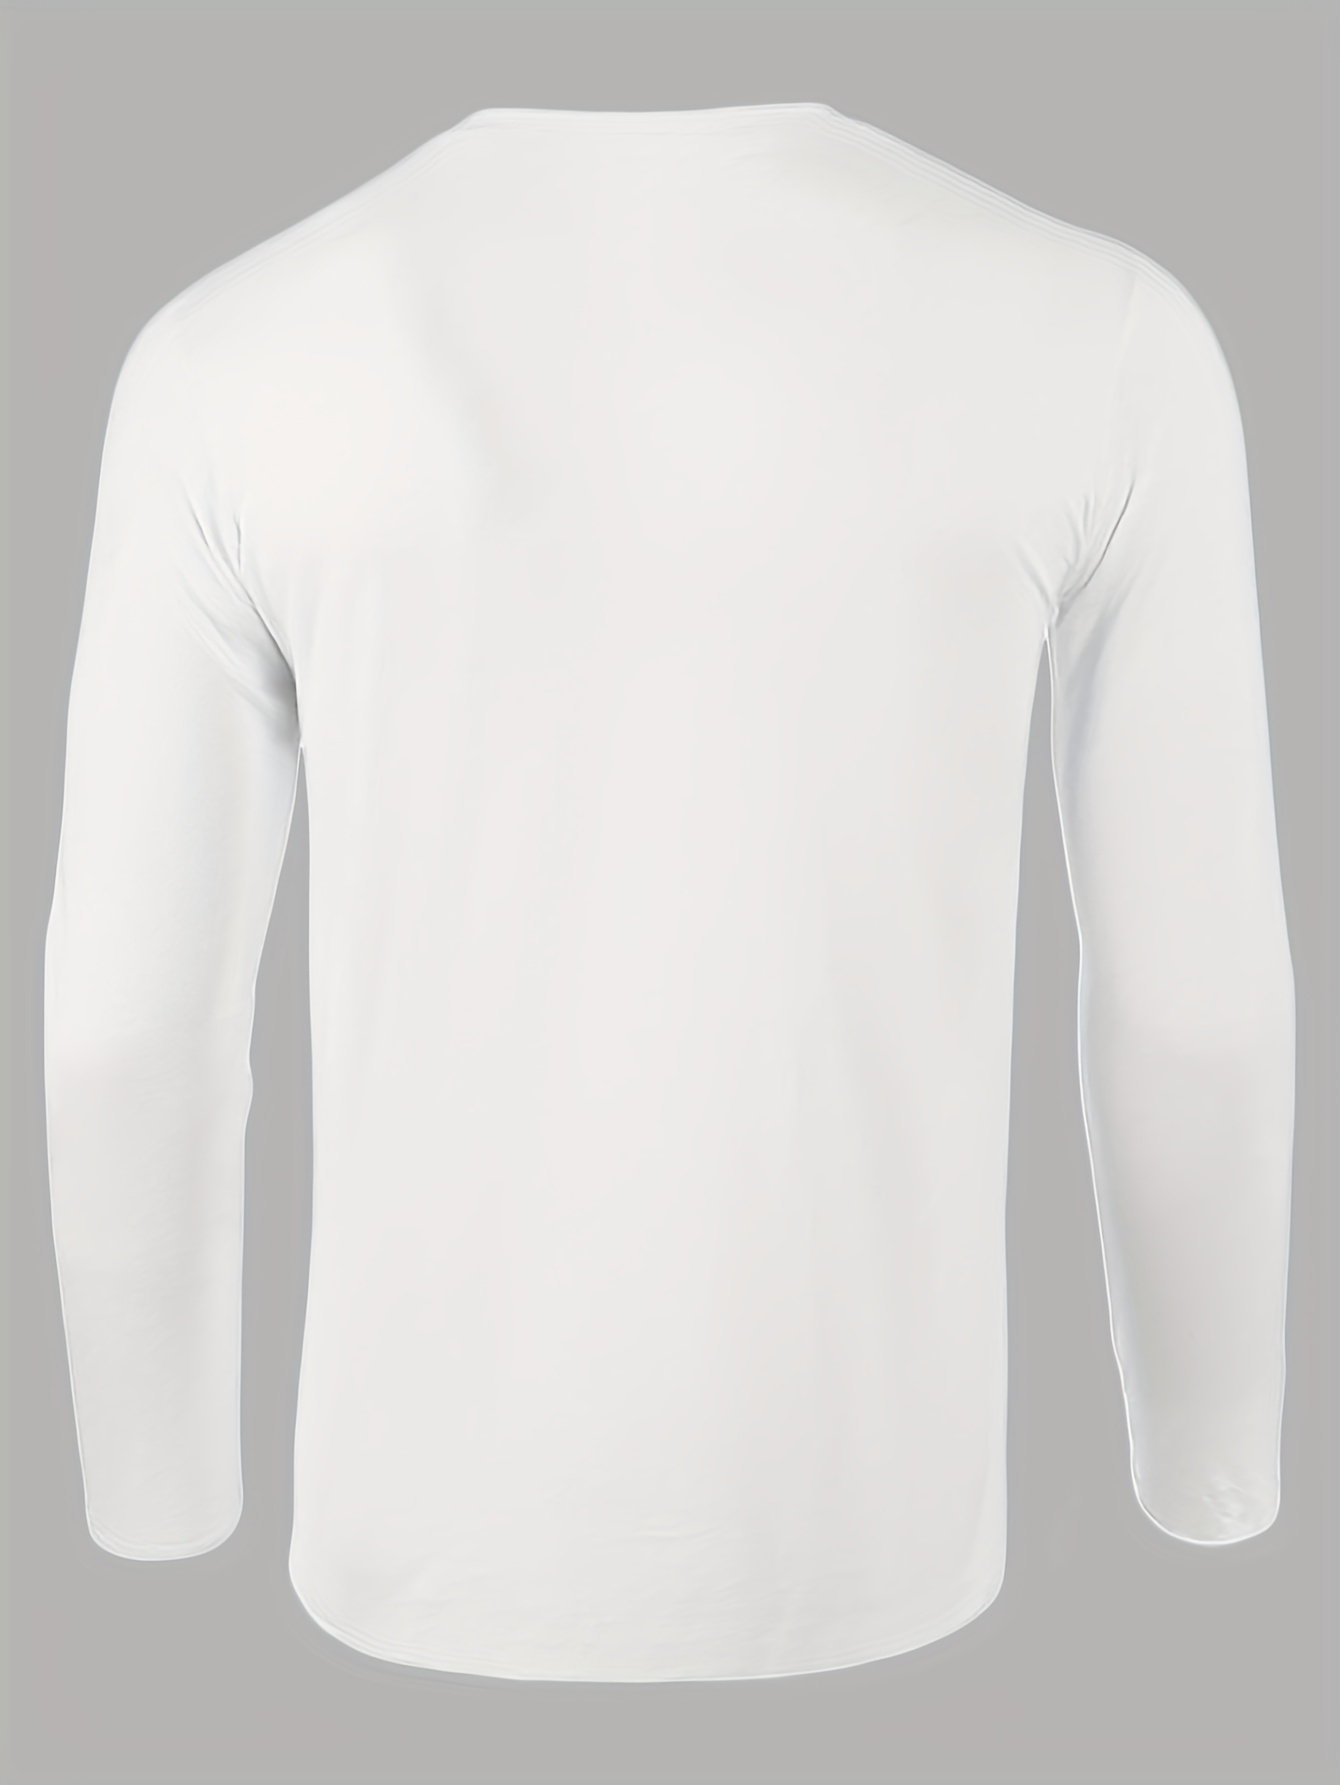 Compression Shirts Men Long Sleeve Athletic Moisture Wicking